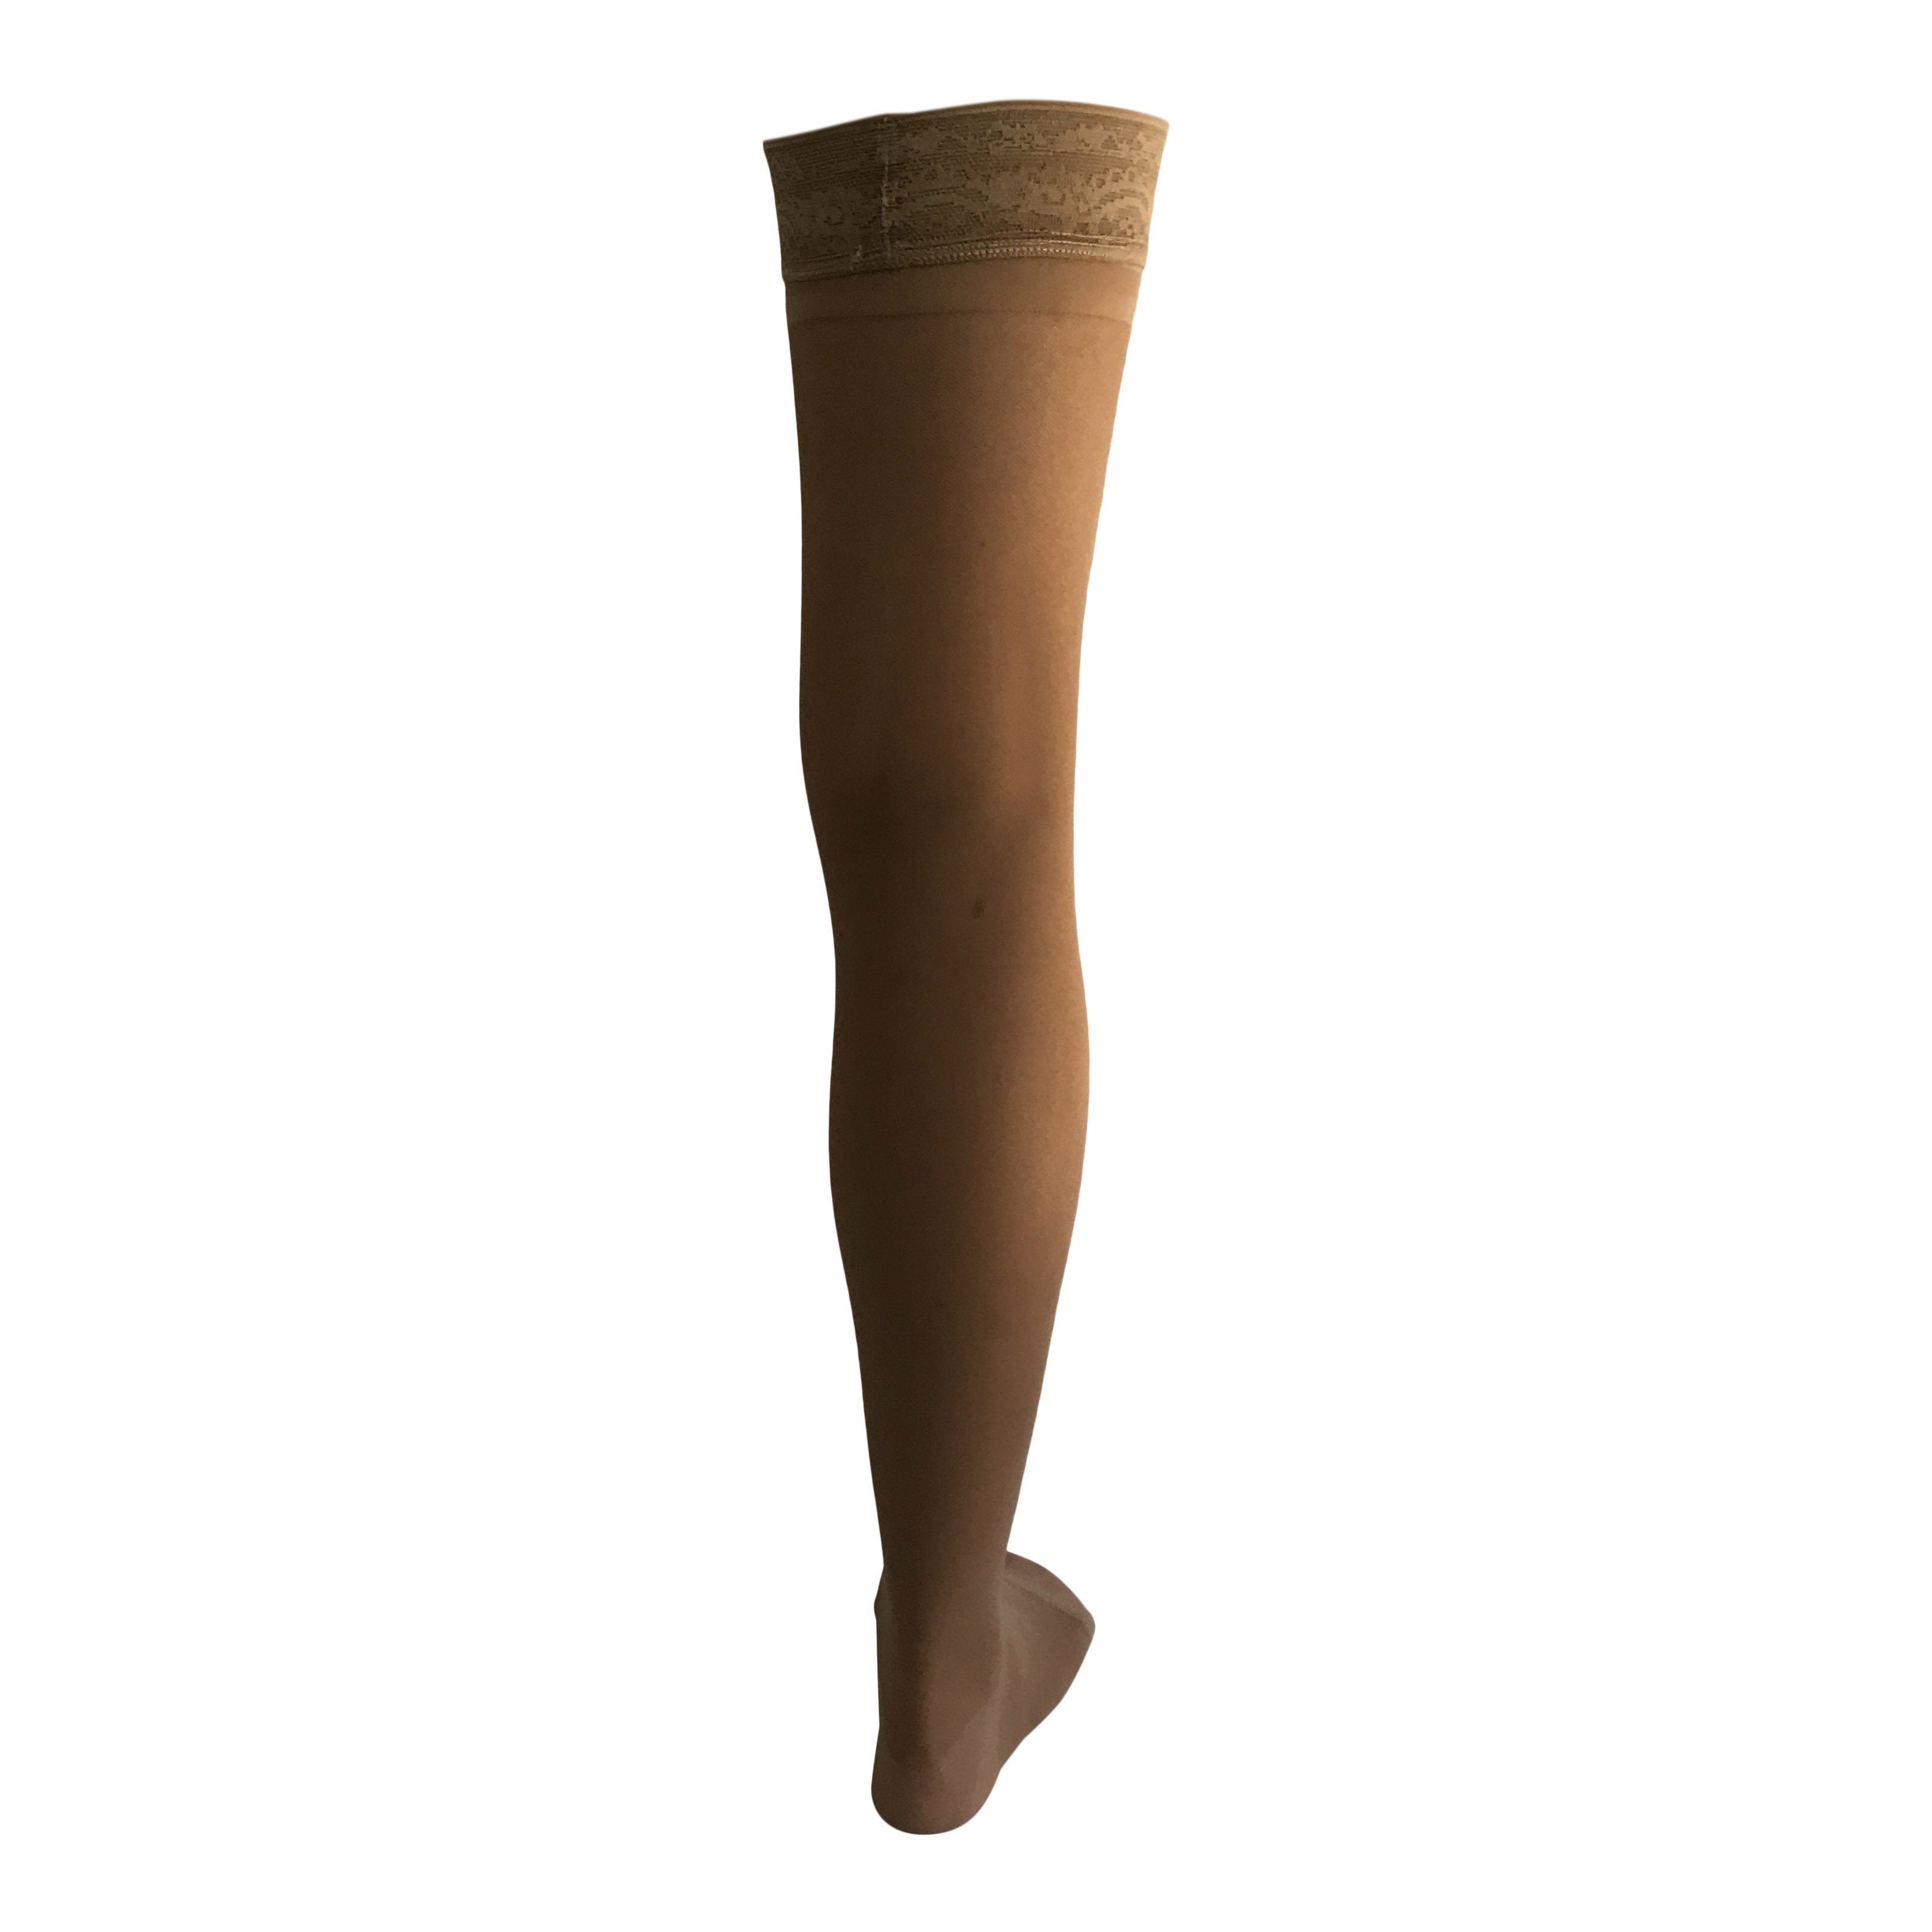 Gradient Compression Socks Firm Support MID THIGH (30 - 40 mmHg)